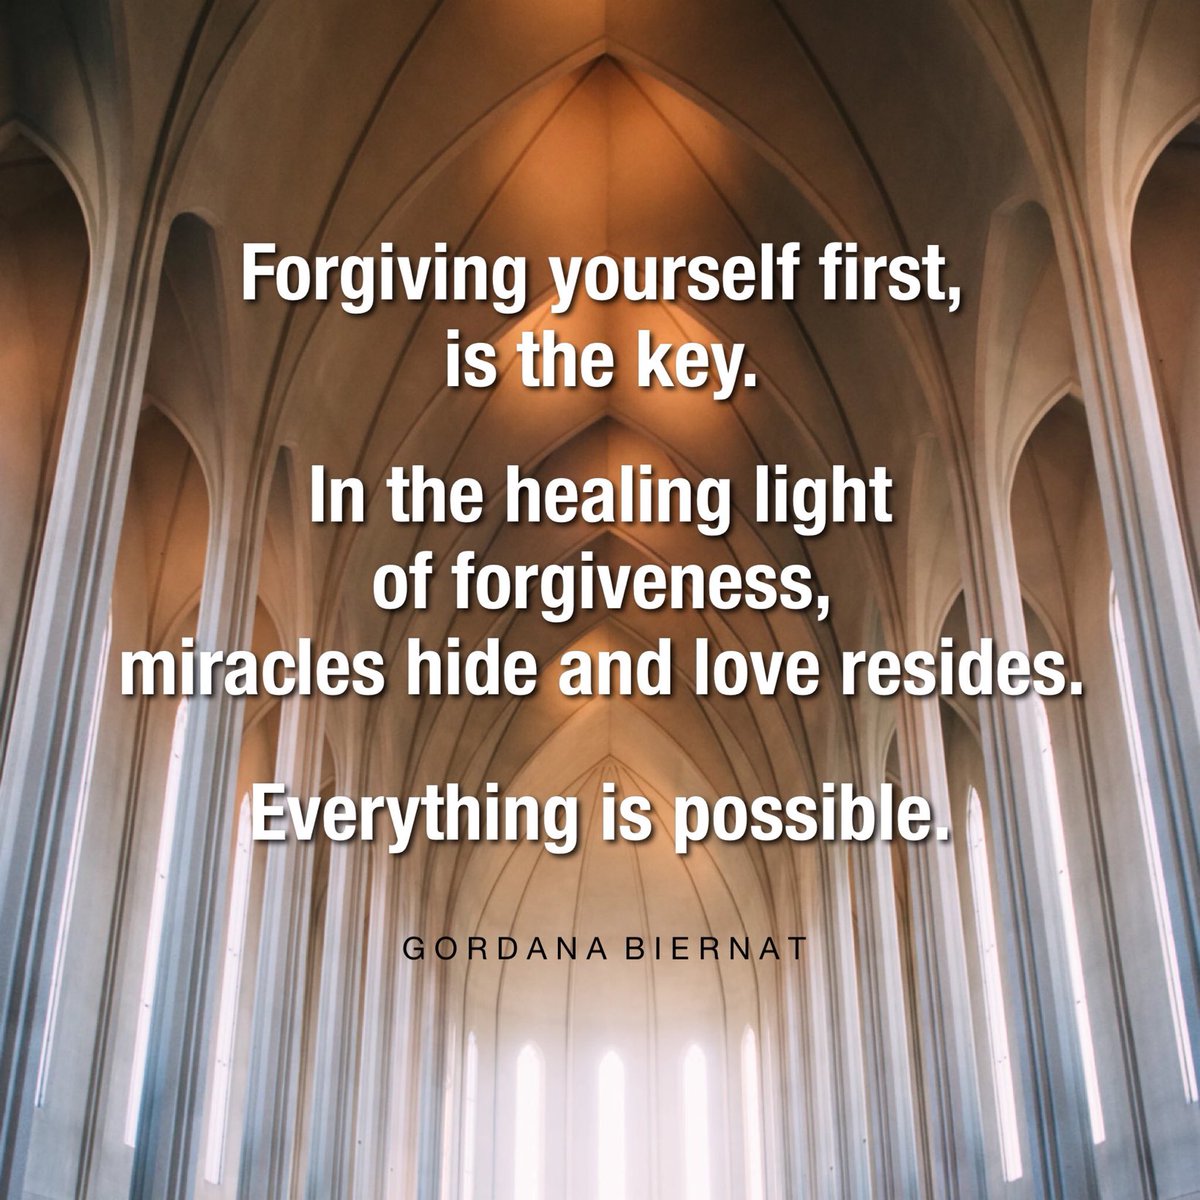 Forgiving yourself first,
is the key.

In the healing light
of forgiveness,
miracles hide
and love resides.

Everything is possible.

#thursdayvibes